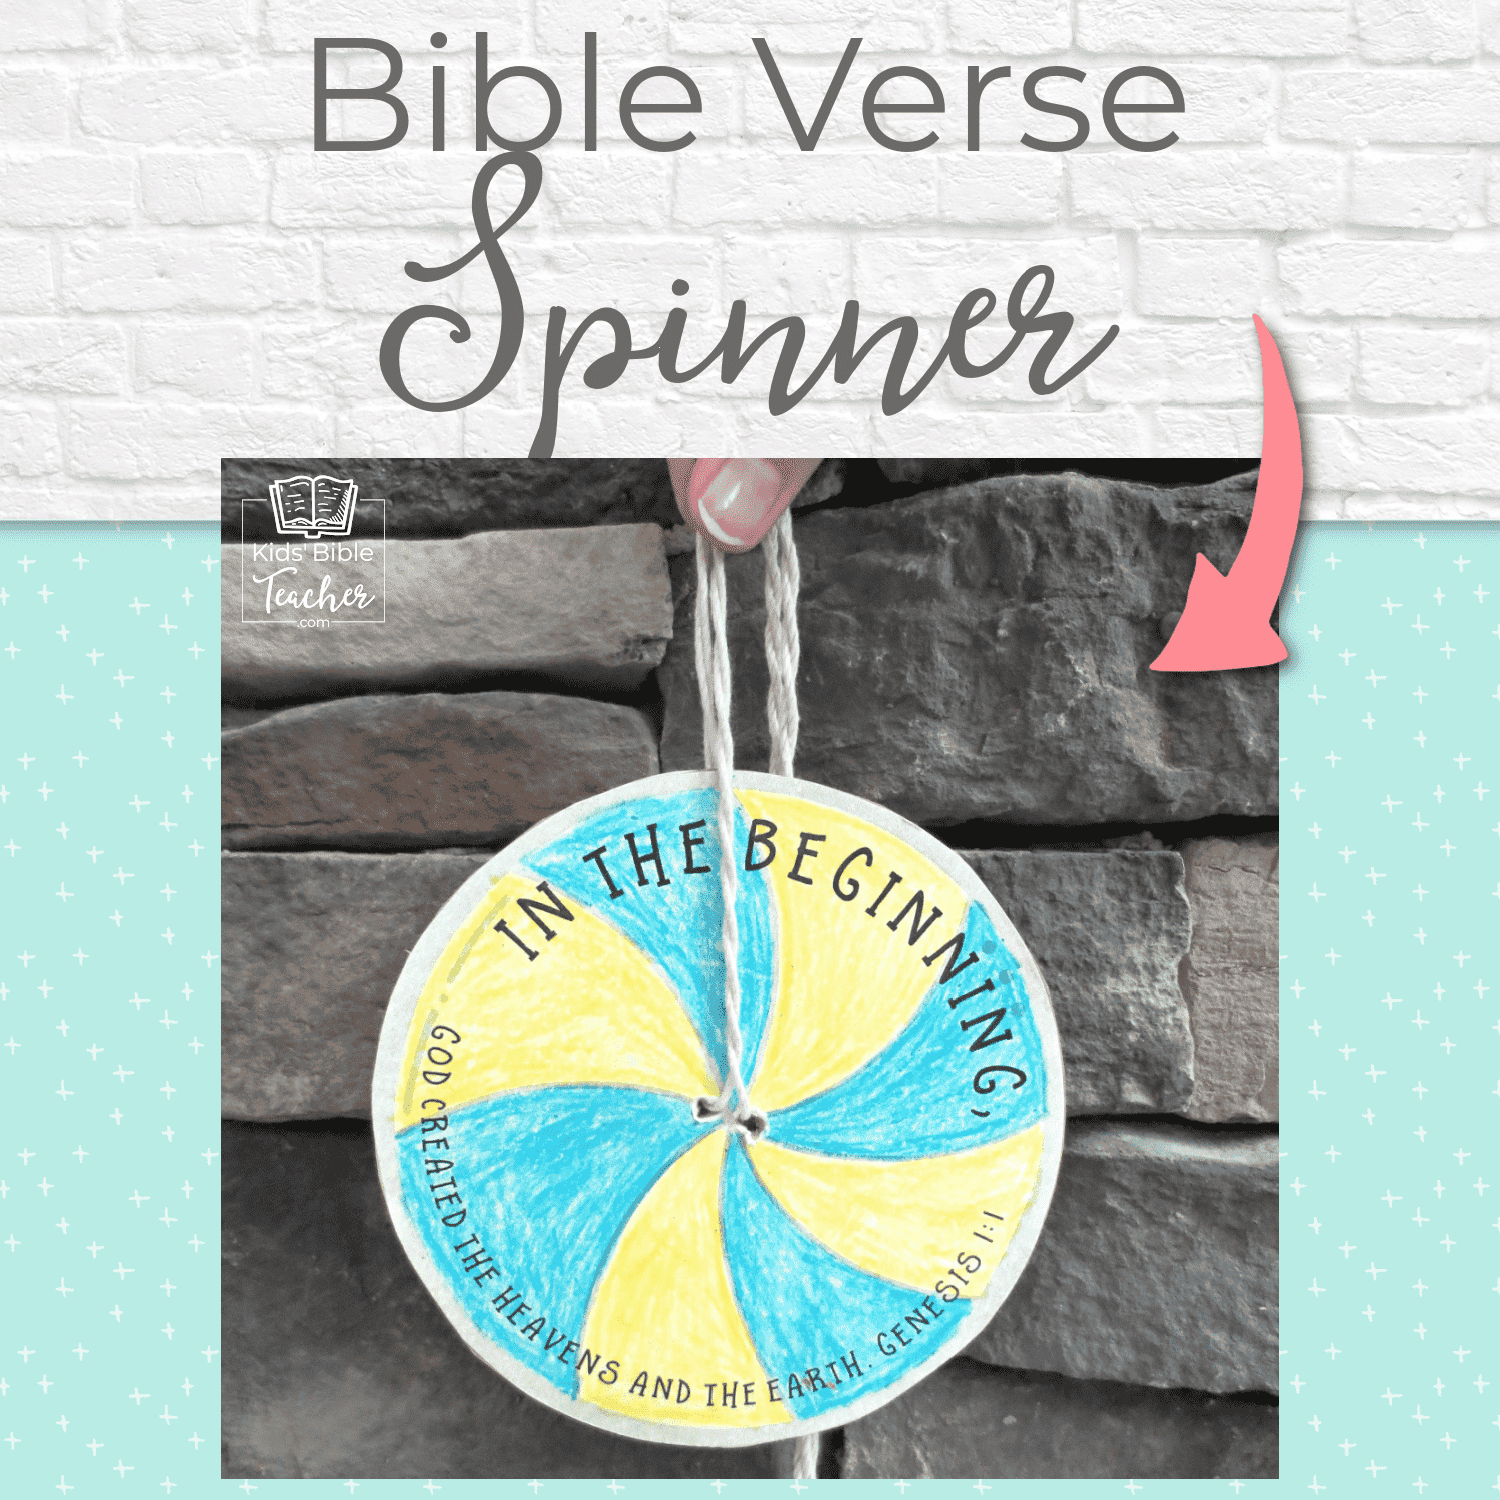 Are your kids fidgety? If so, they will love this Bible Verse Spinner craft - a creative and active way to memorize a Bible verse.